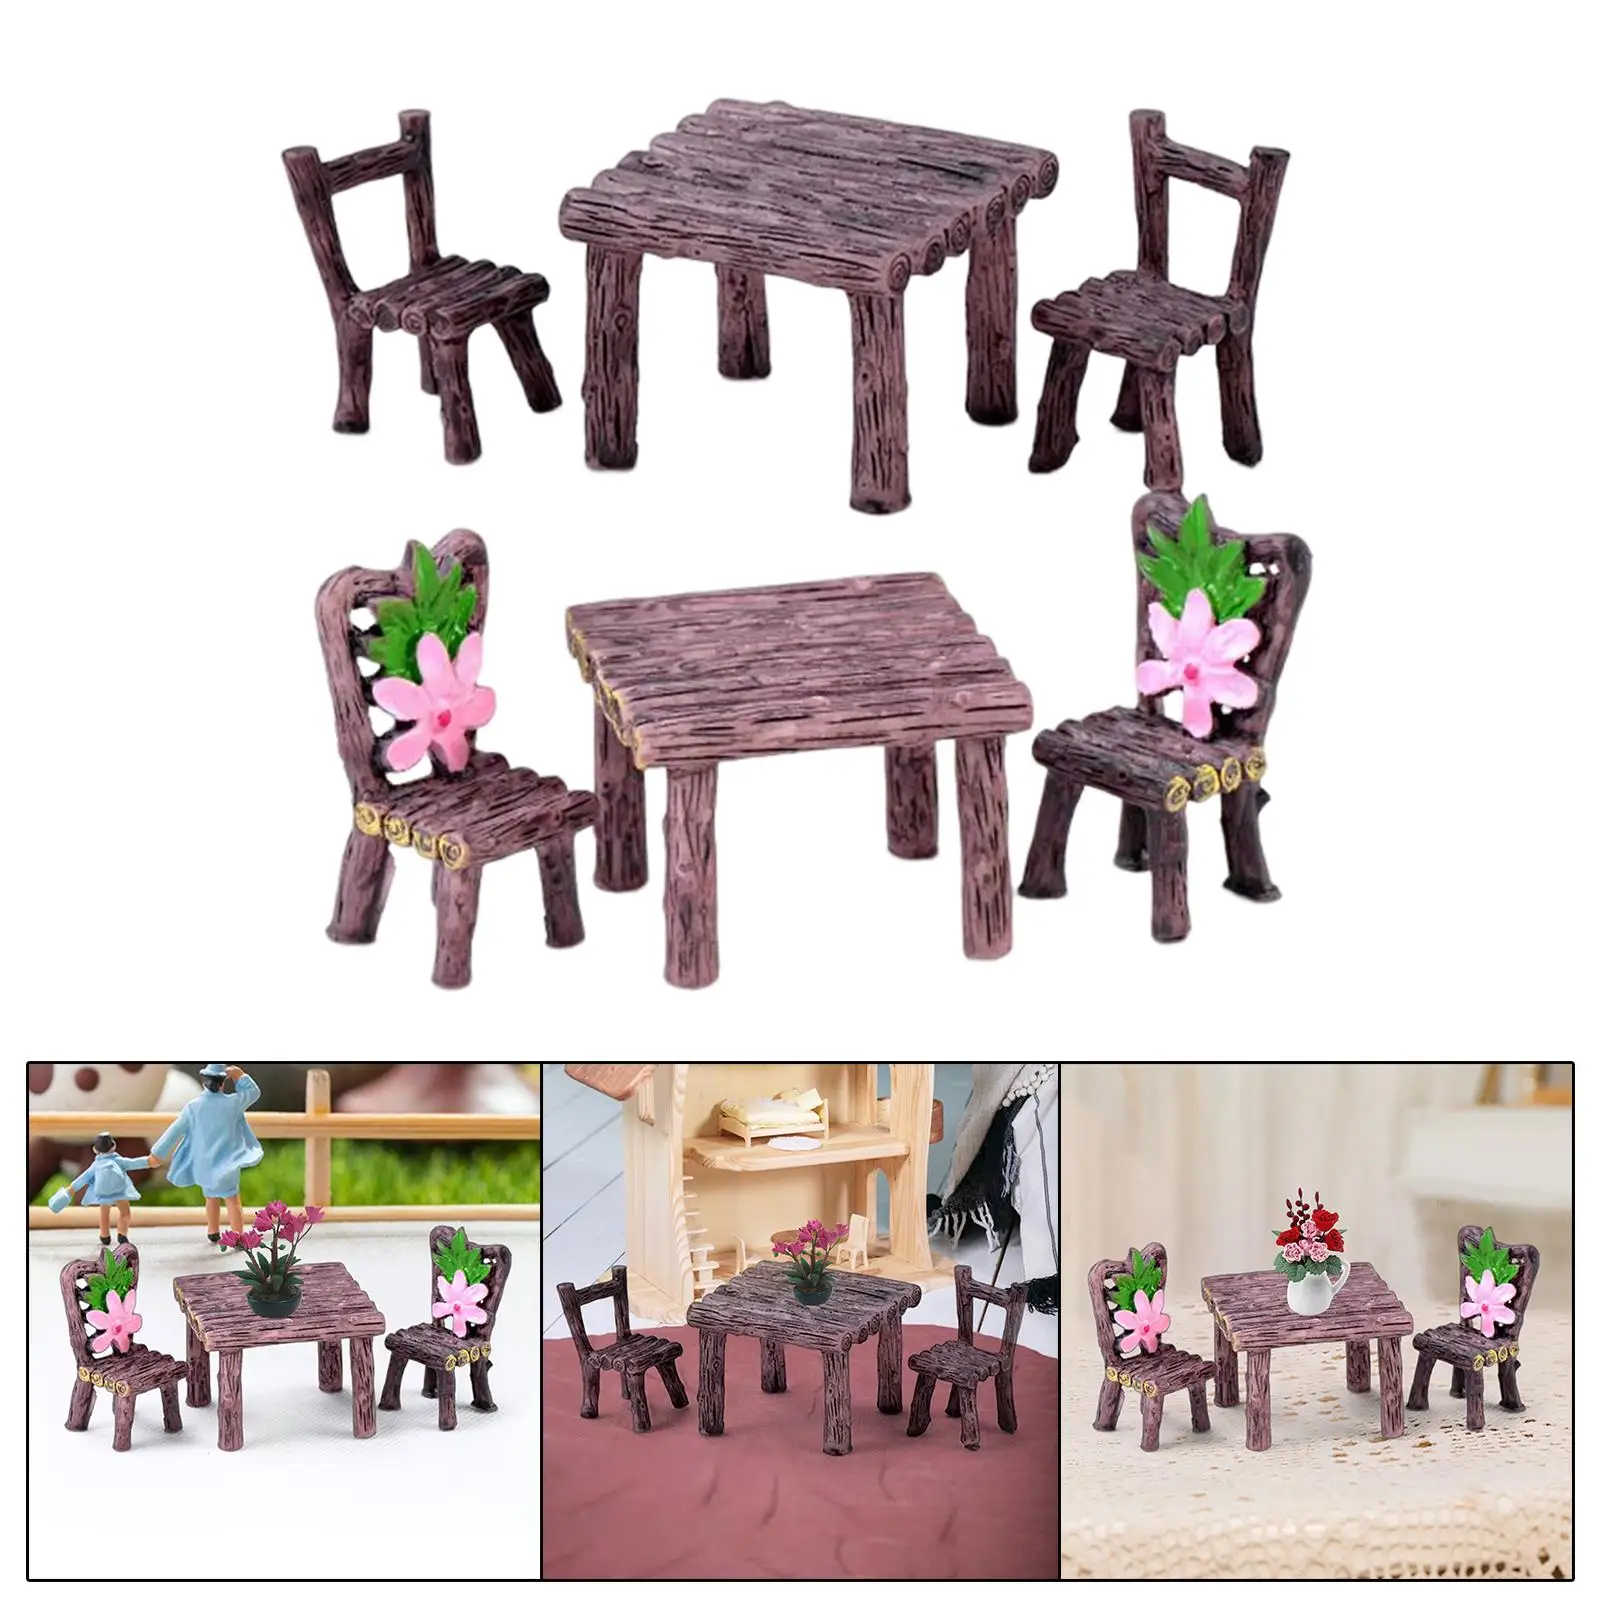 Miniature Table Chairs Set Toys Ornament Resin Figurines Sculpture for DIY Projects Sand Table Fairy Garden Street Building